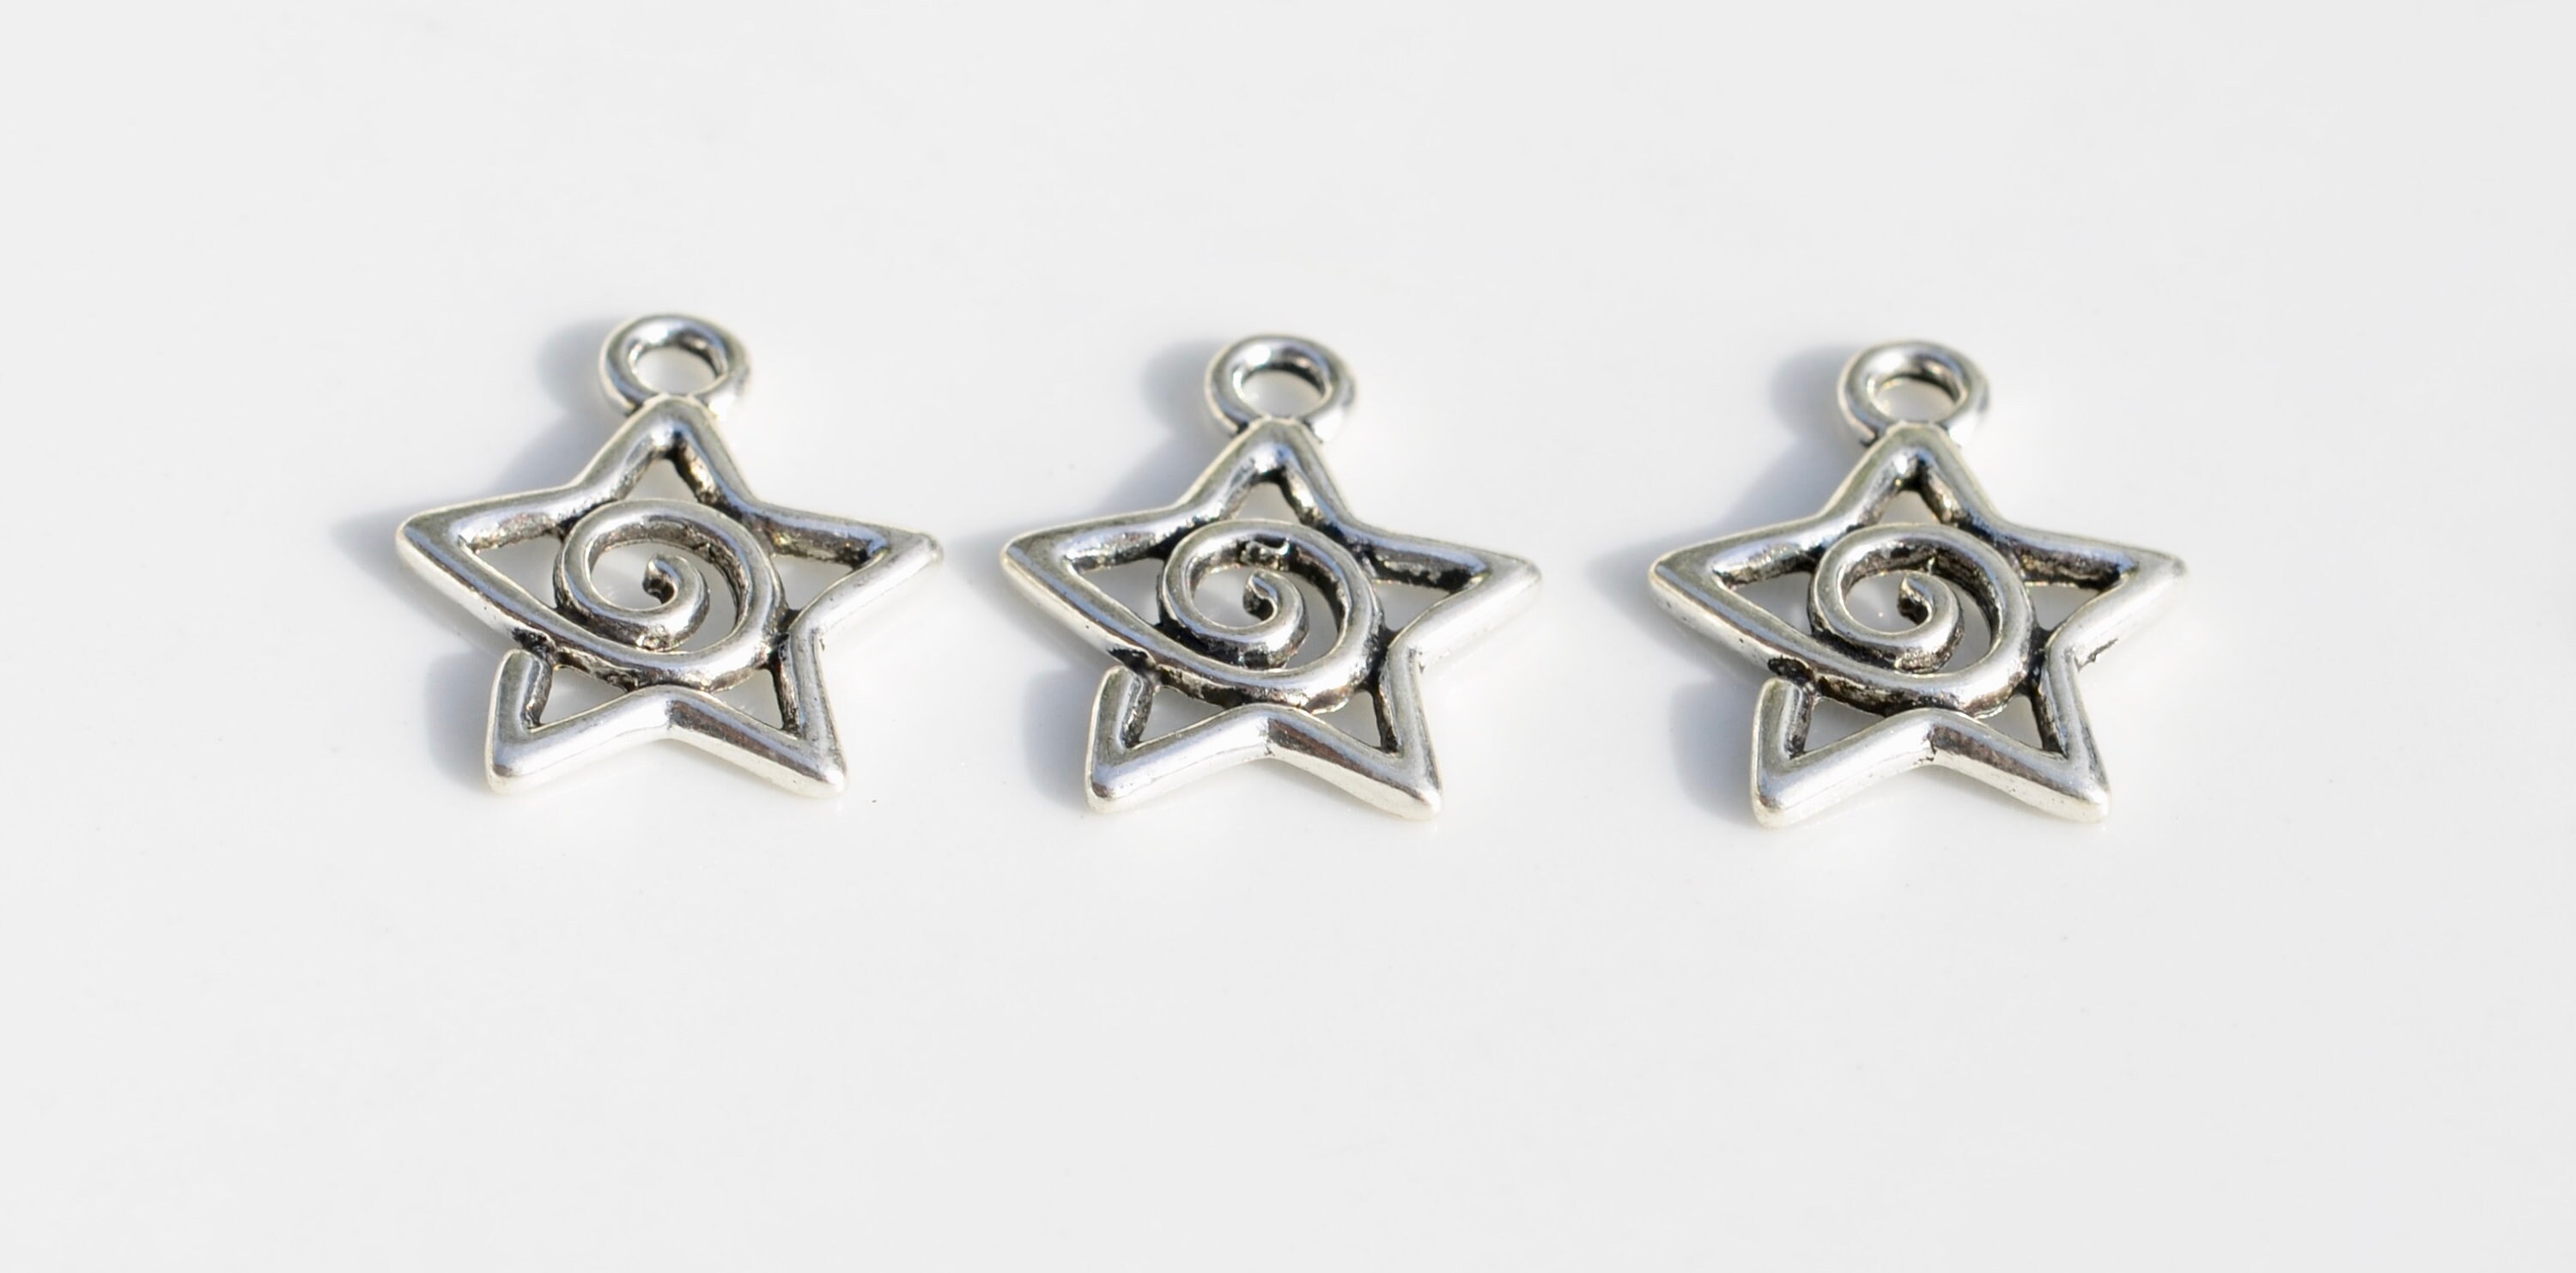 10 Star With Little Stars, Silver Tone Charms SC6055 